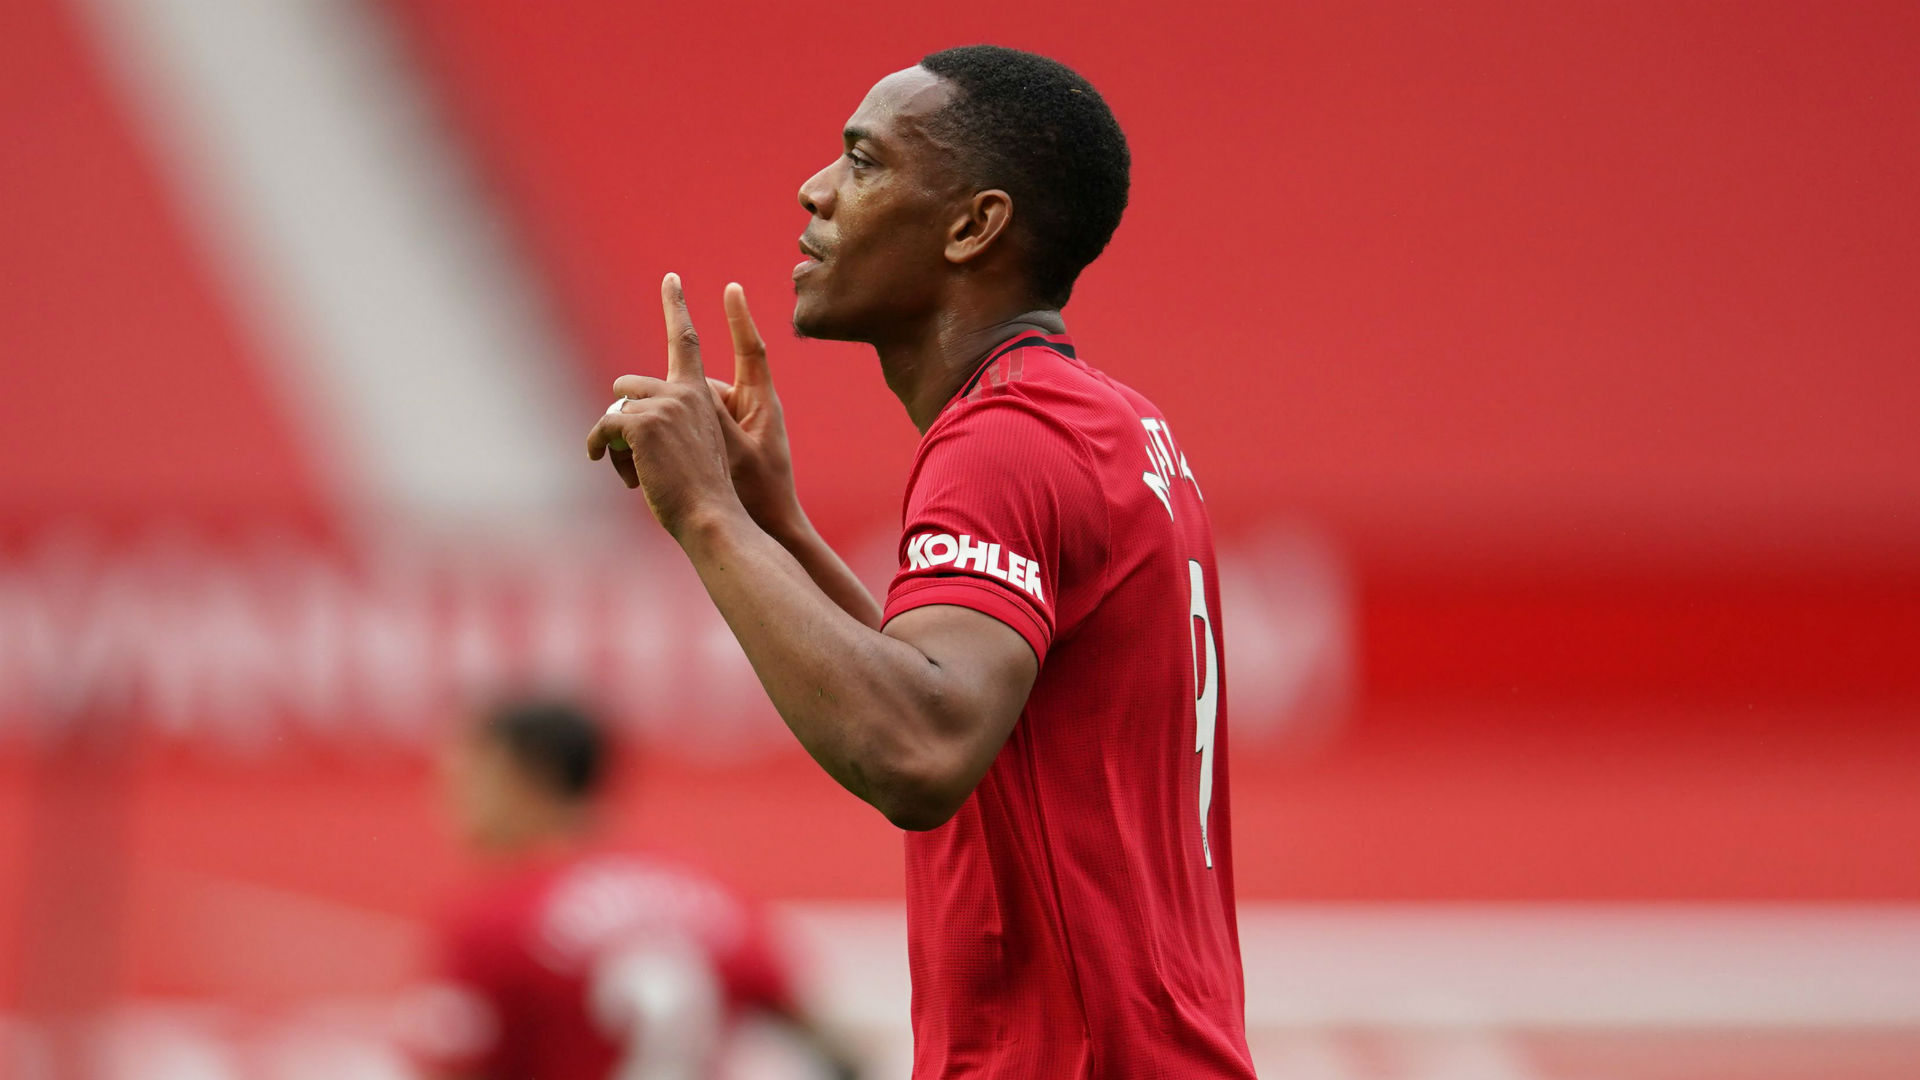 Manchester United midfielder Nemanja Matic says Anthony Martial is reaping the rewards for putting in the hard work in training.